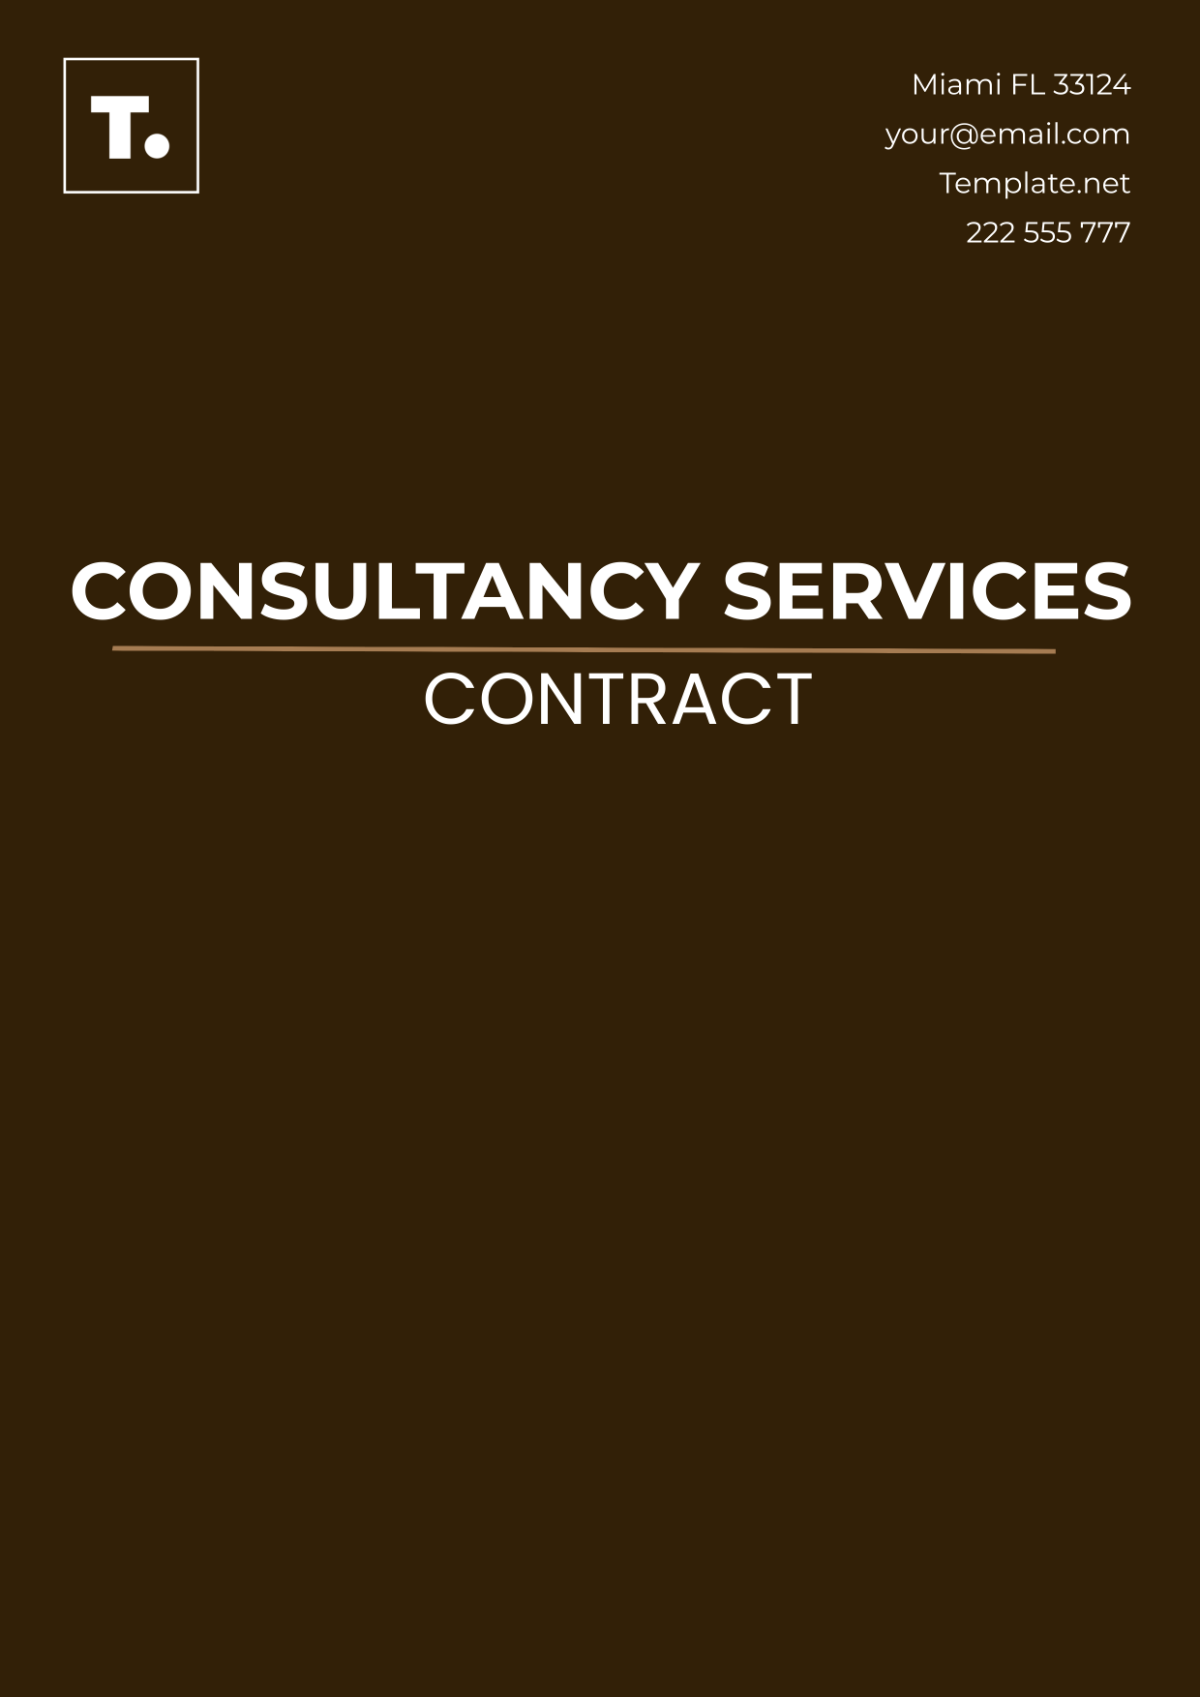 Consultancy Services Contract Template